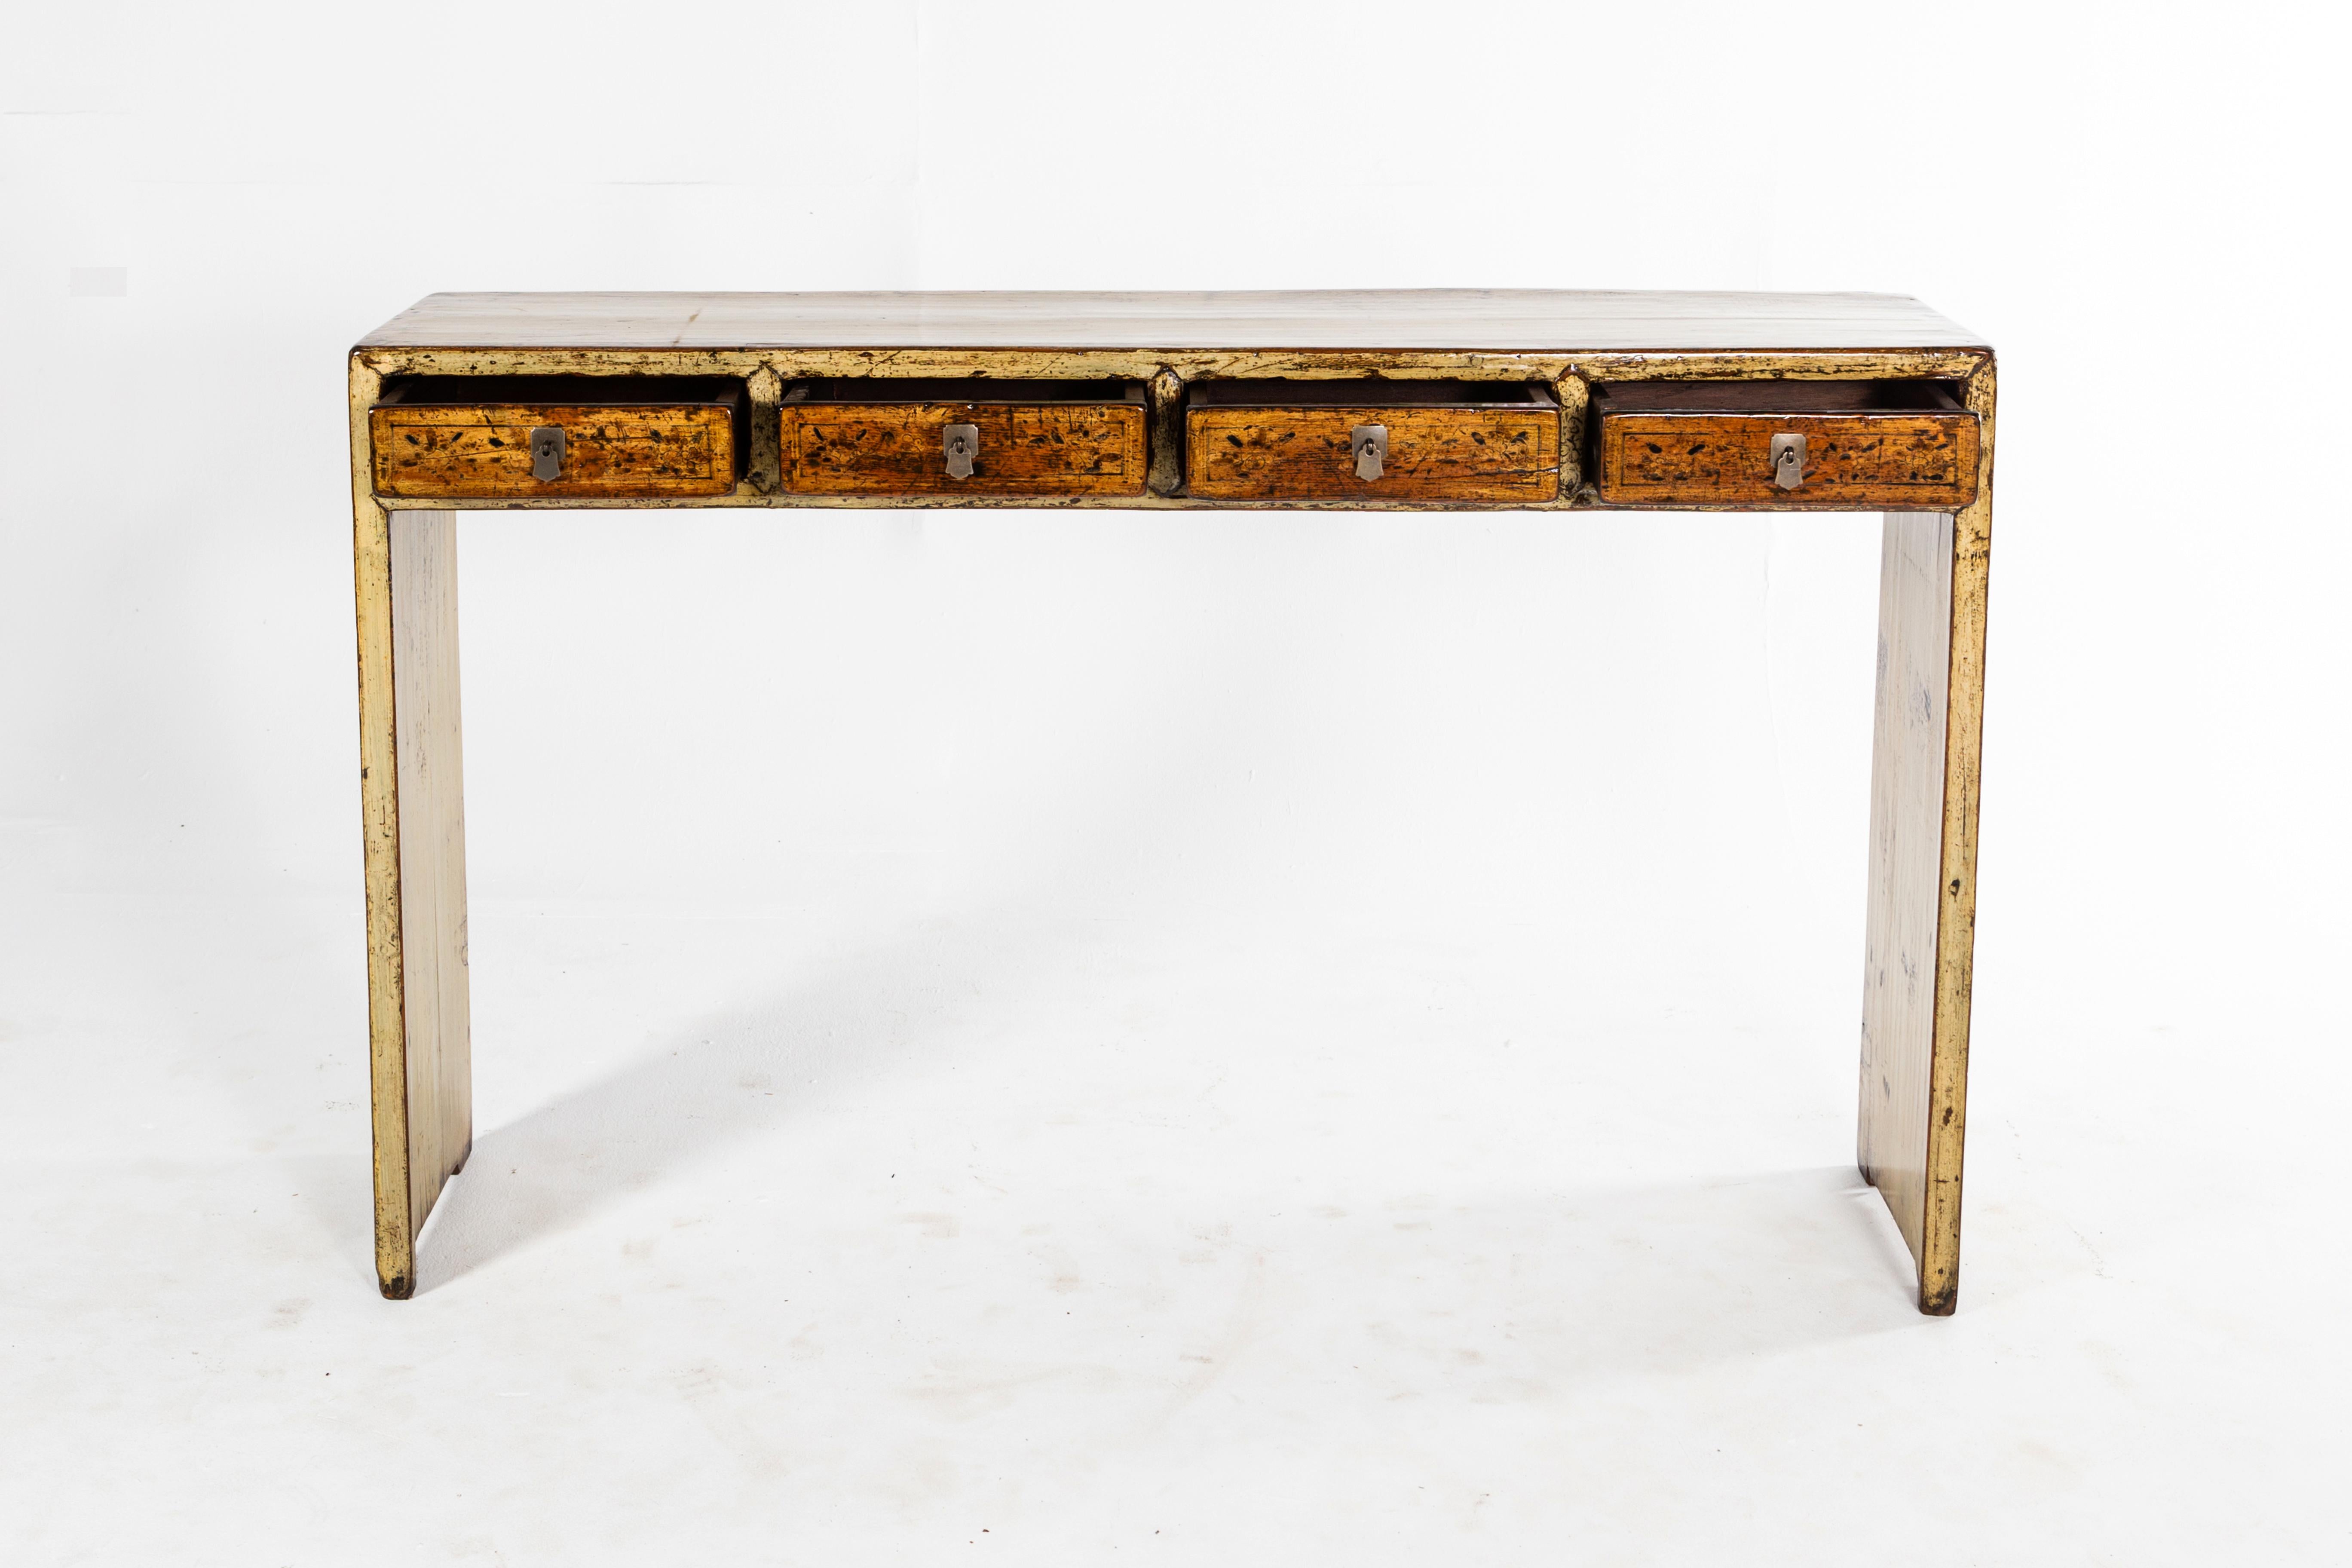 This handsome console table is from Dongbei, China and was made from pine and elm, circa 1920. The piece features 4 drawers and a beautifully aged patina. Wear consistent with age and use.